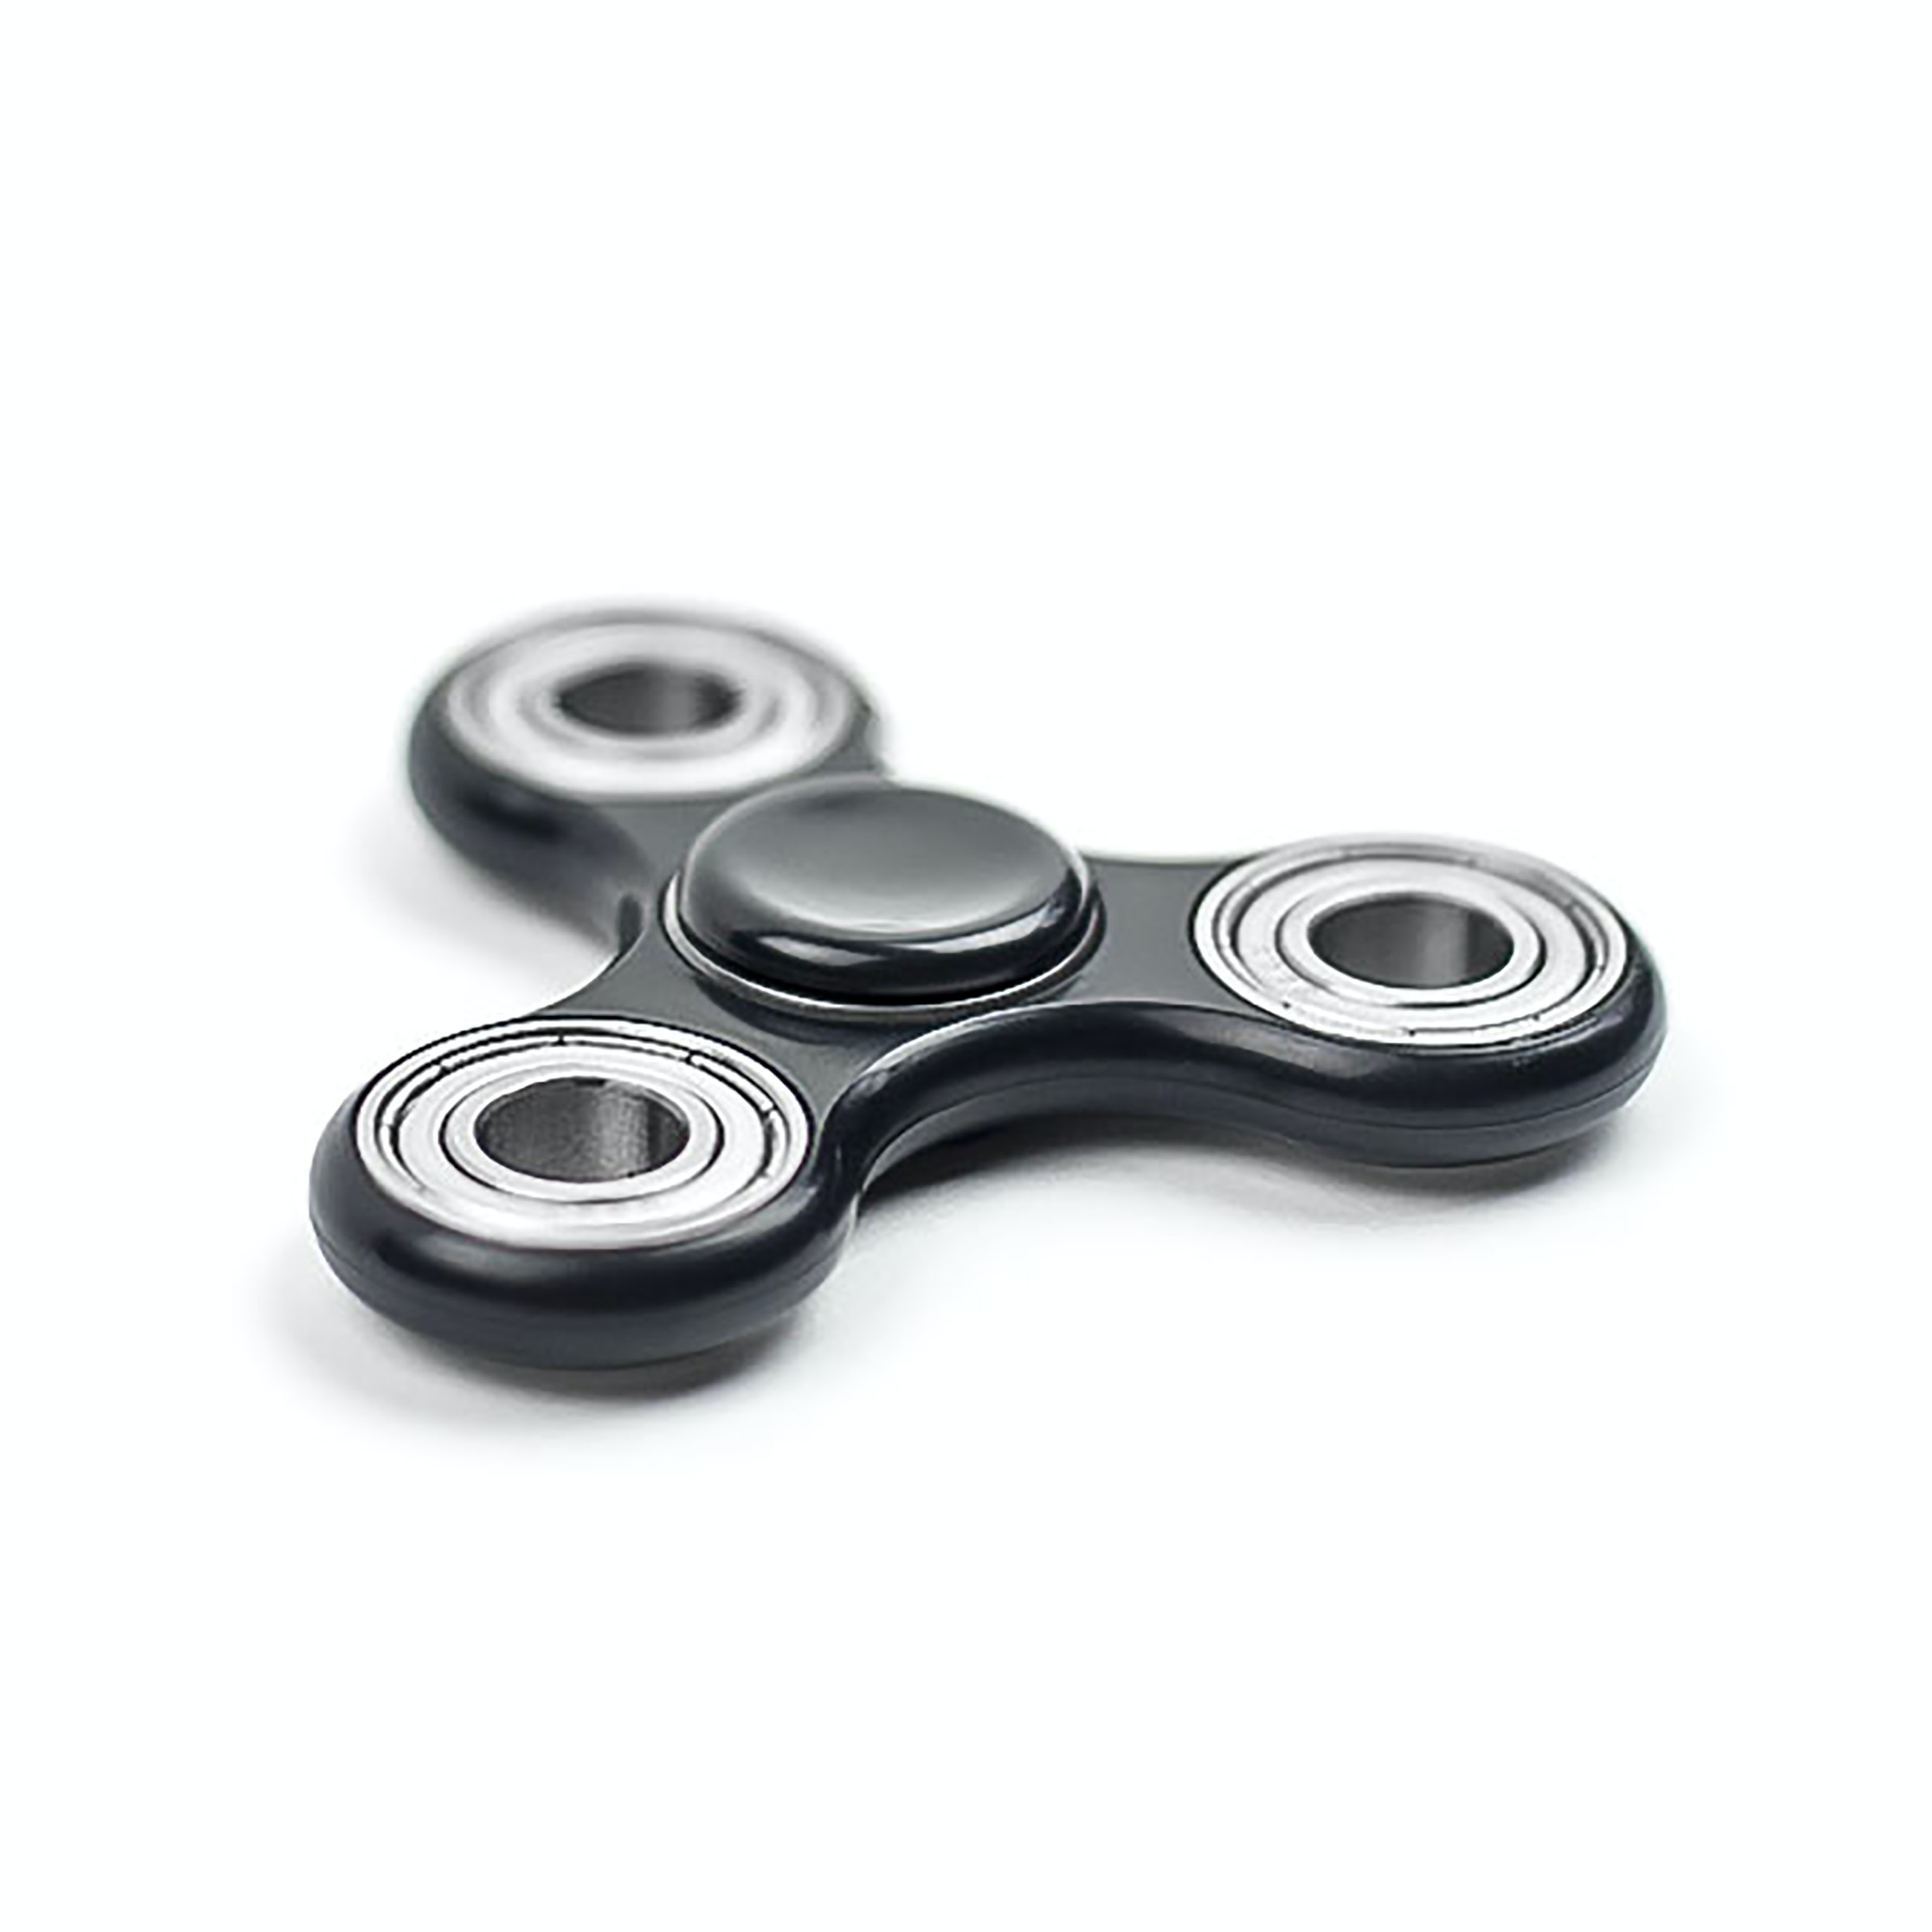 A photo of a black fidget spinner toy.